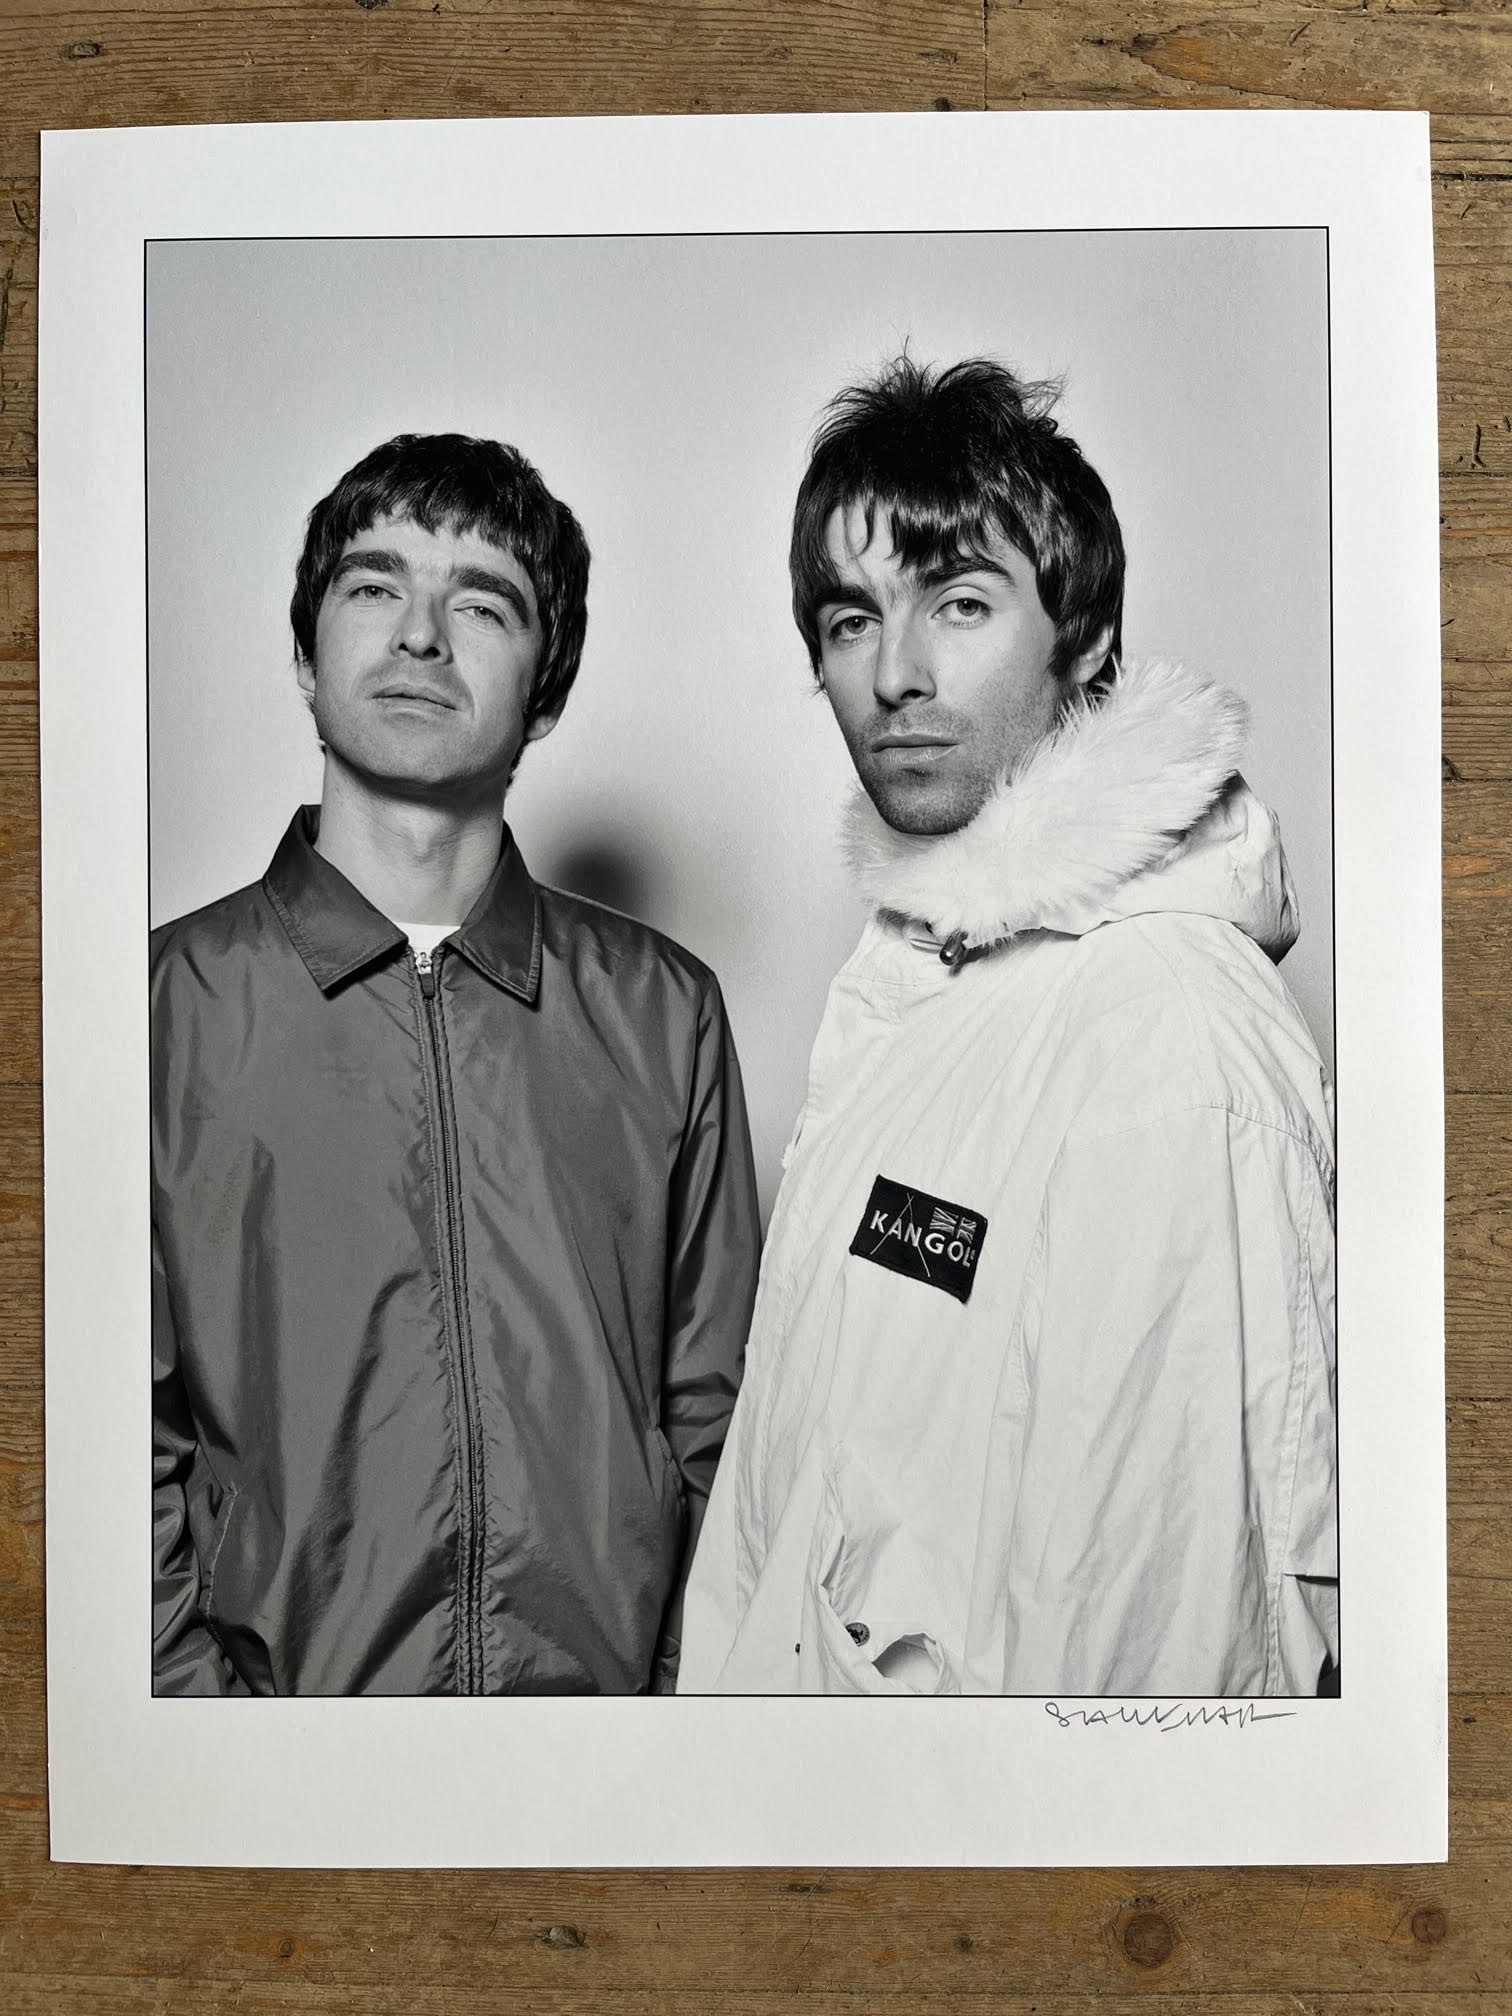 Scarlet Page - OASIS - LARGE - RARE ARTIST PROOF